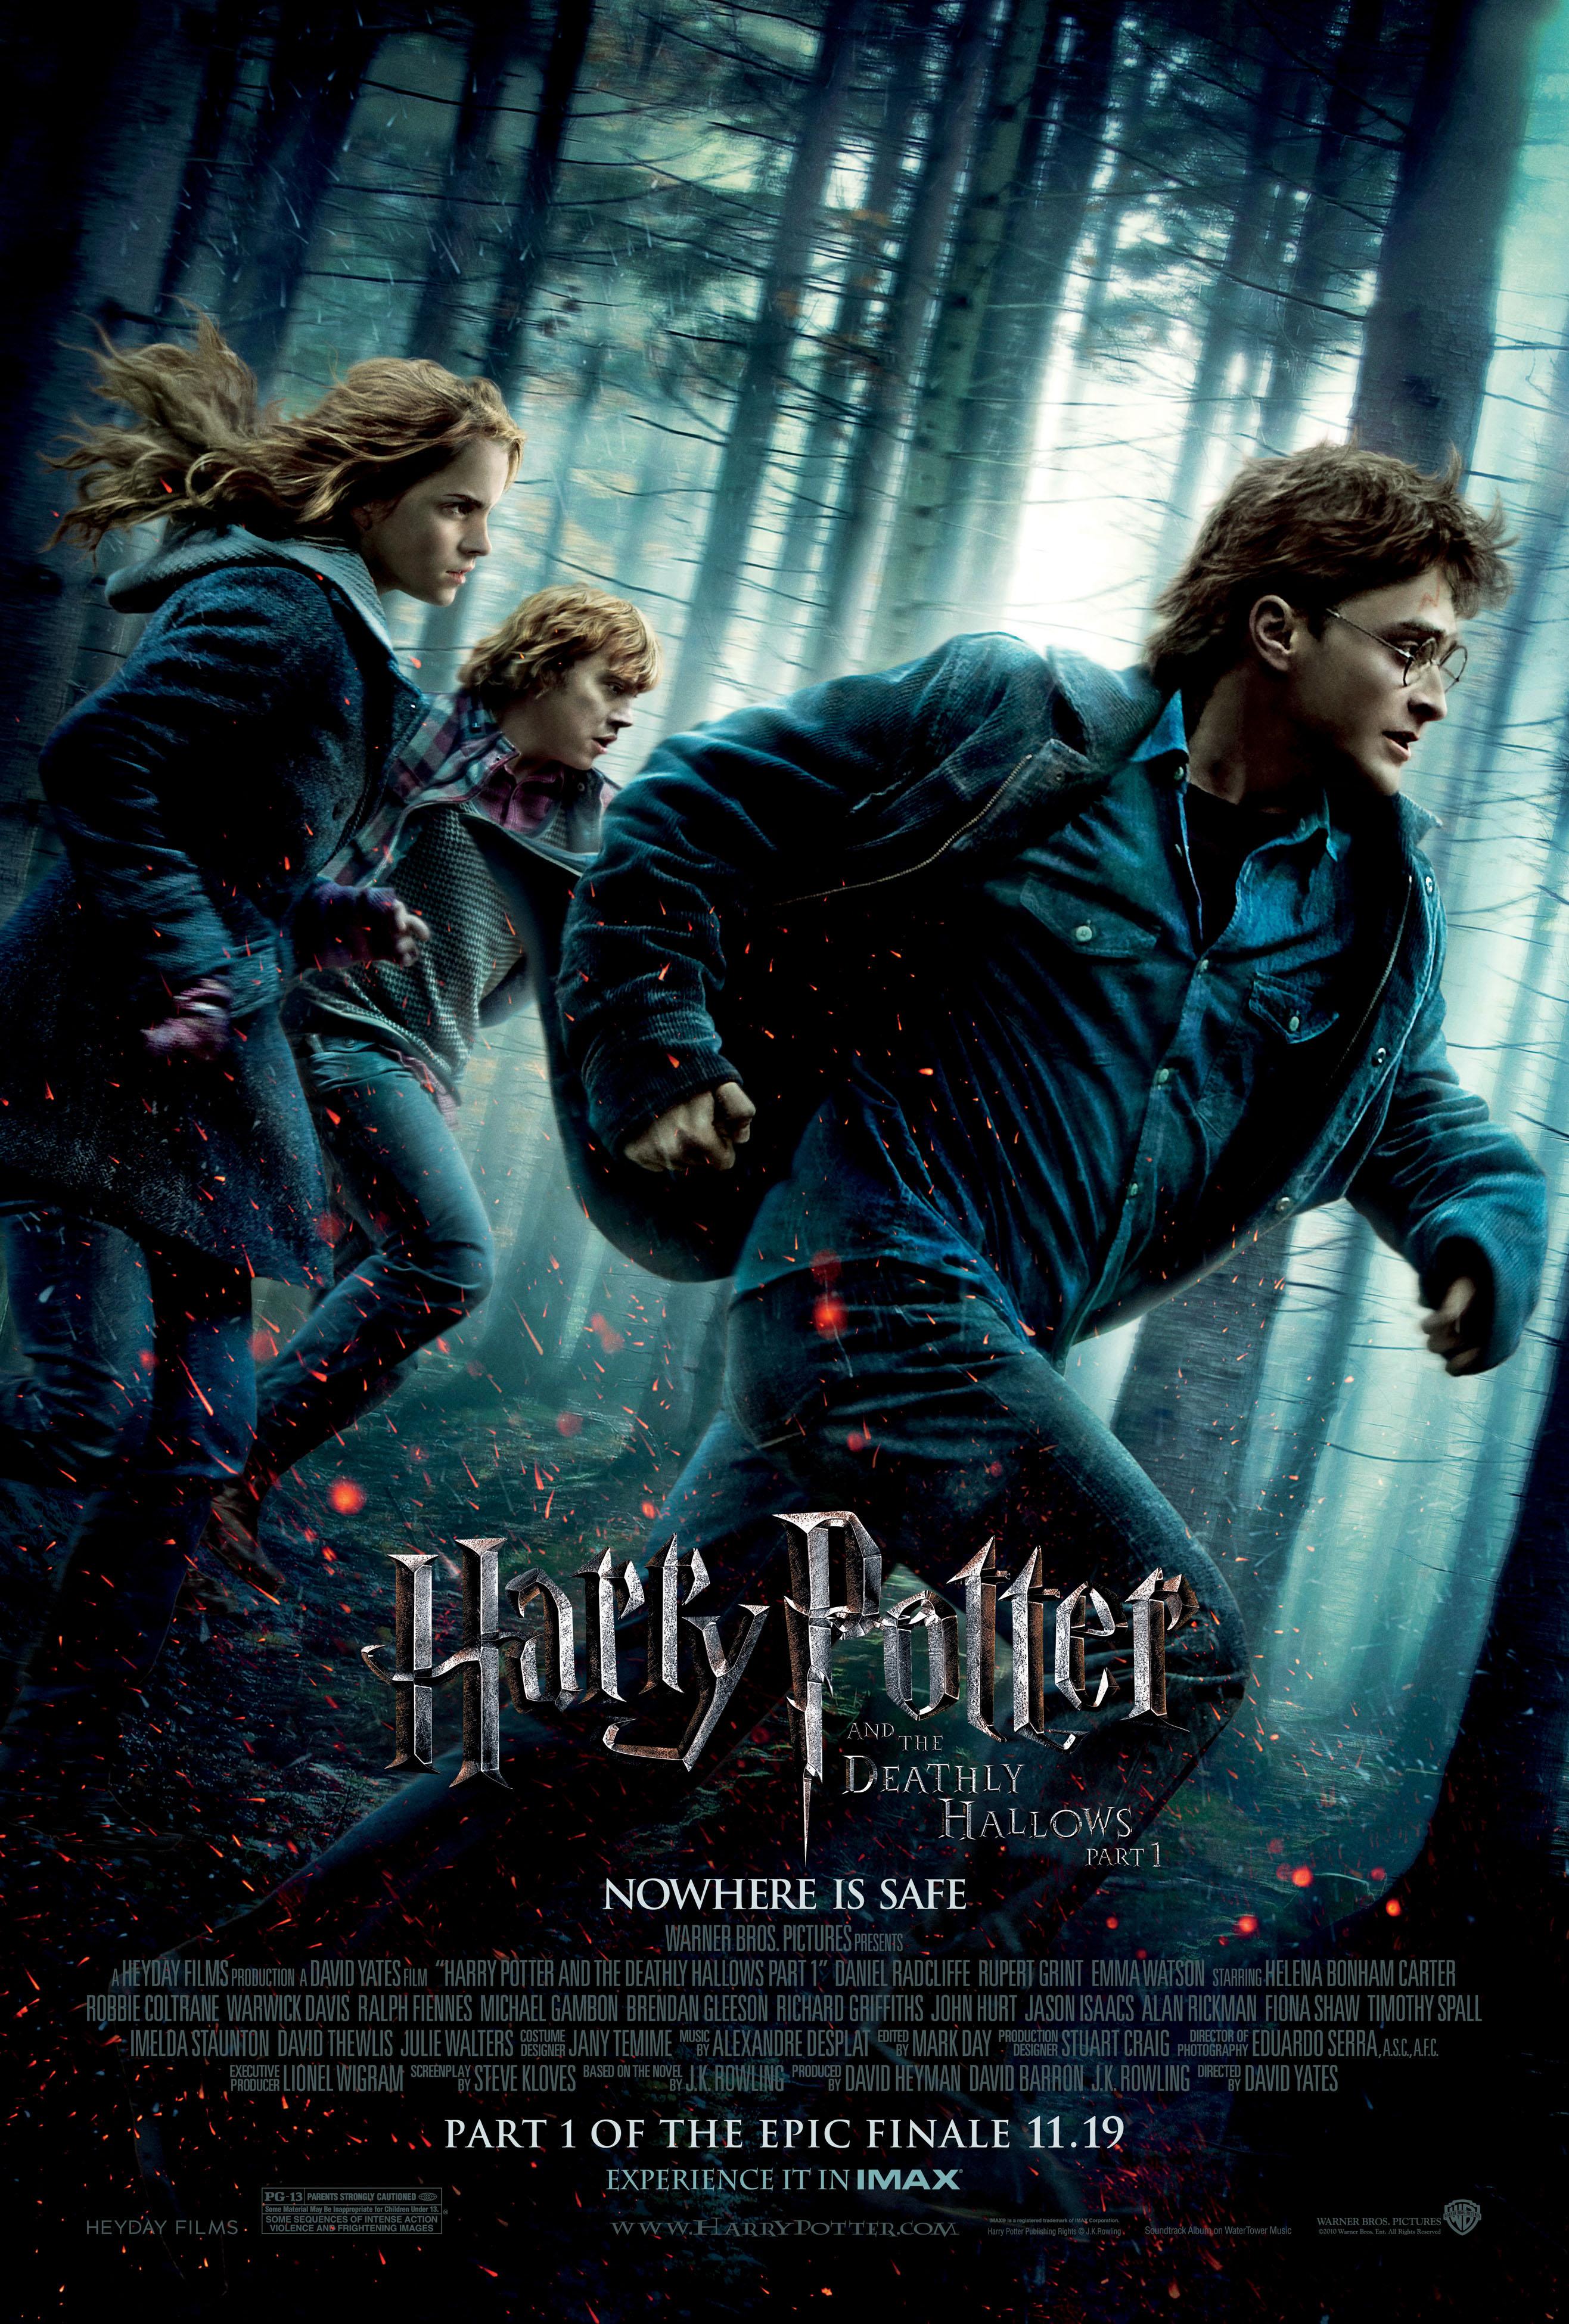 Harry Potter and the Deathly Hallows - Part 1.jpg